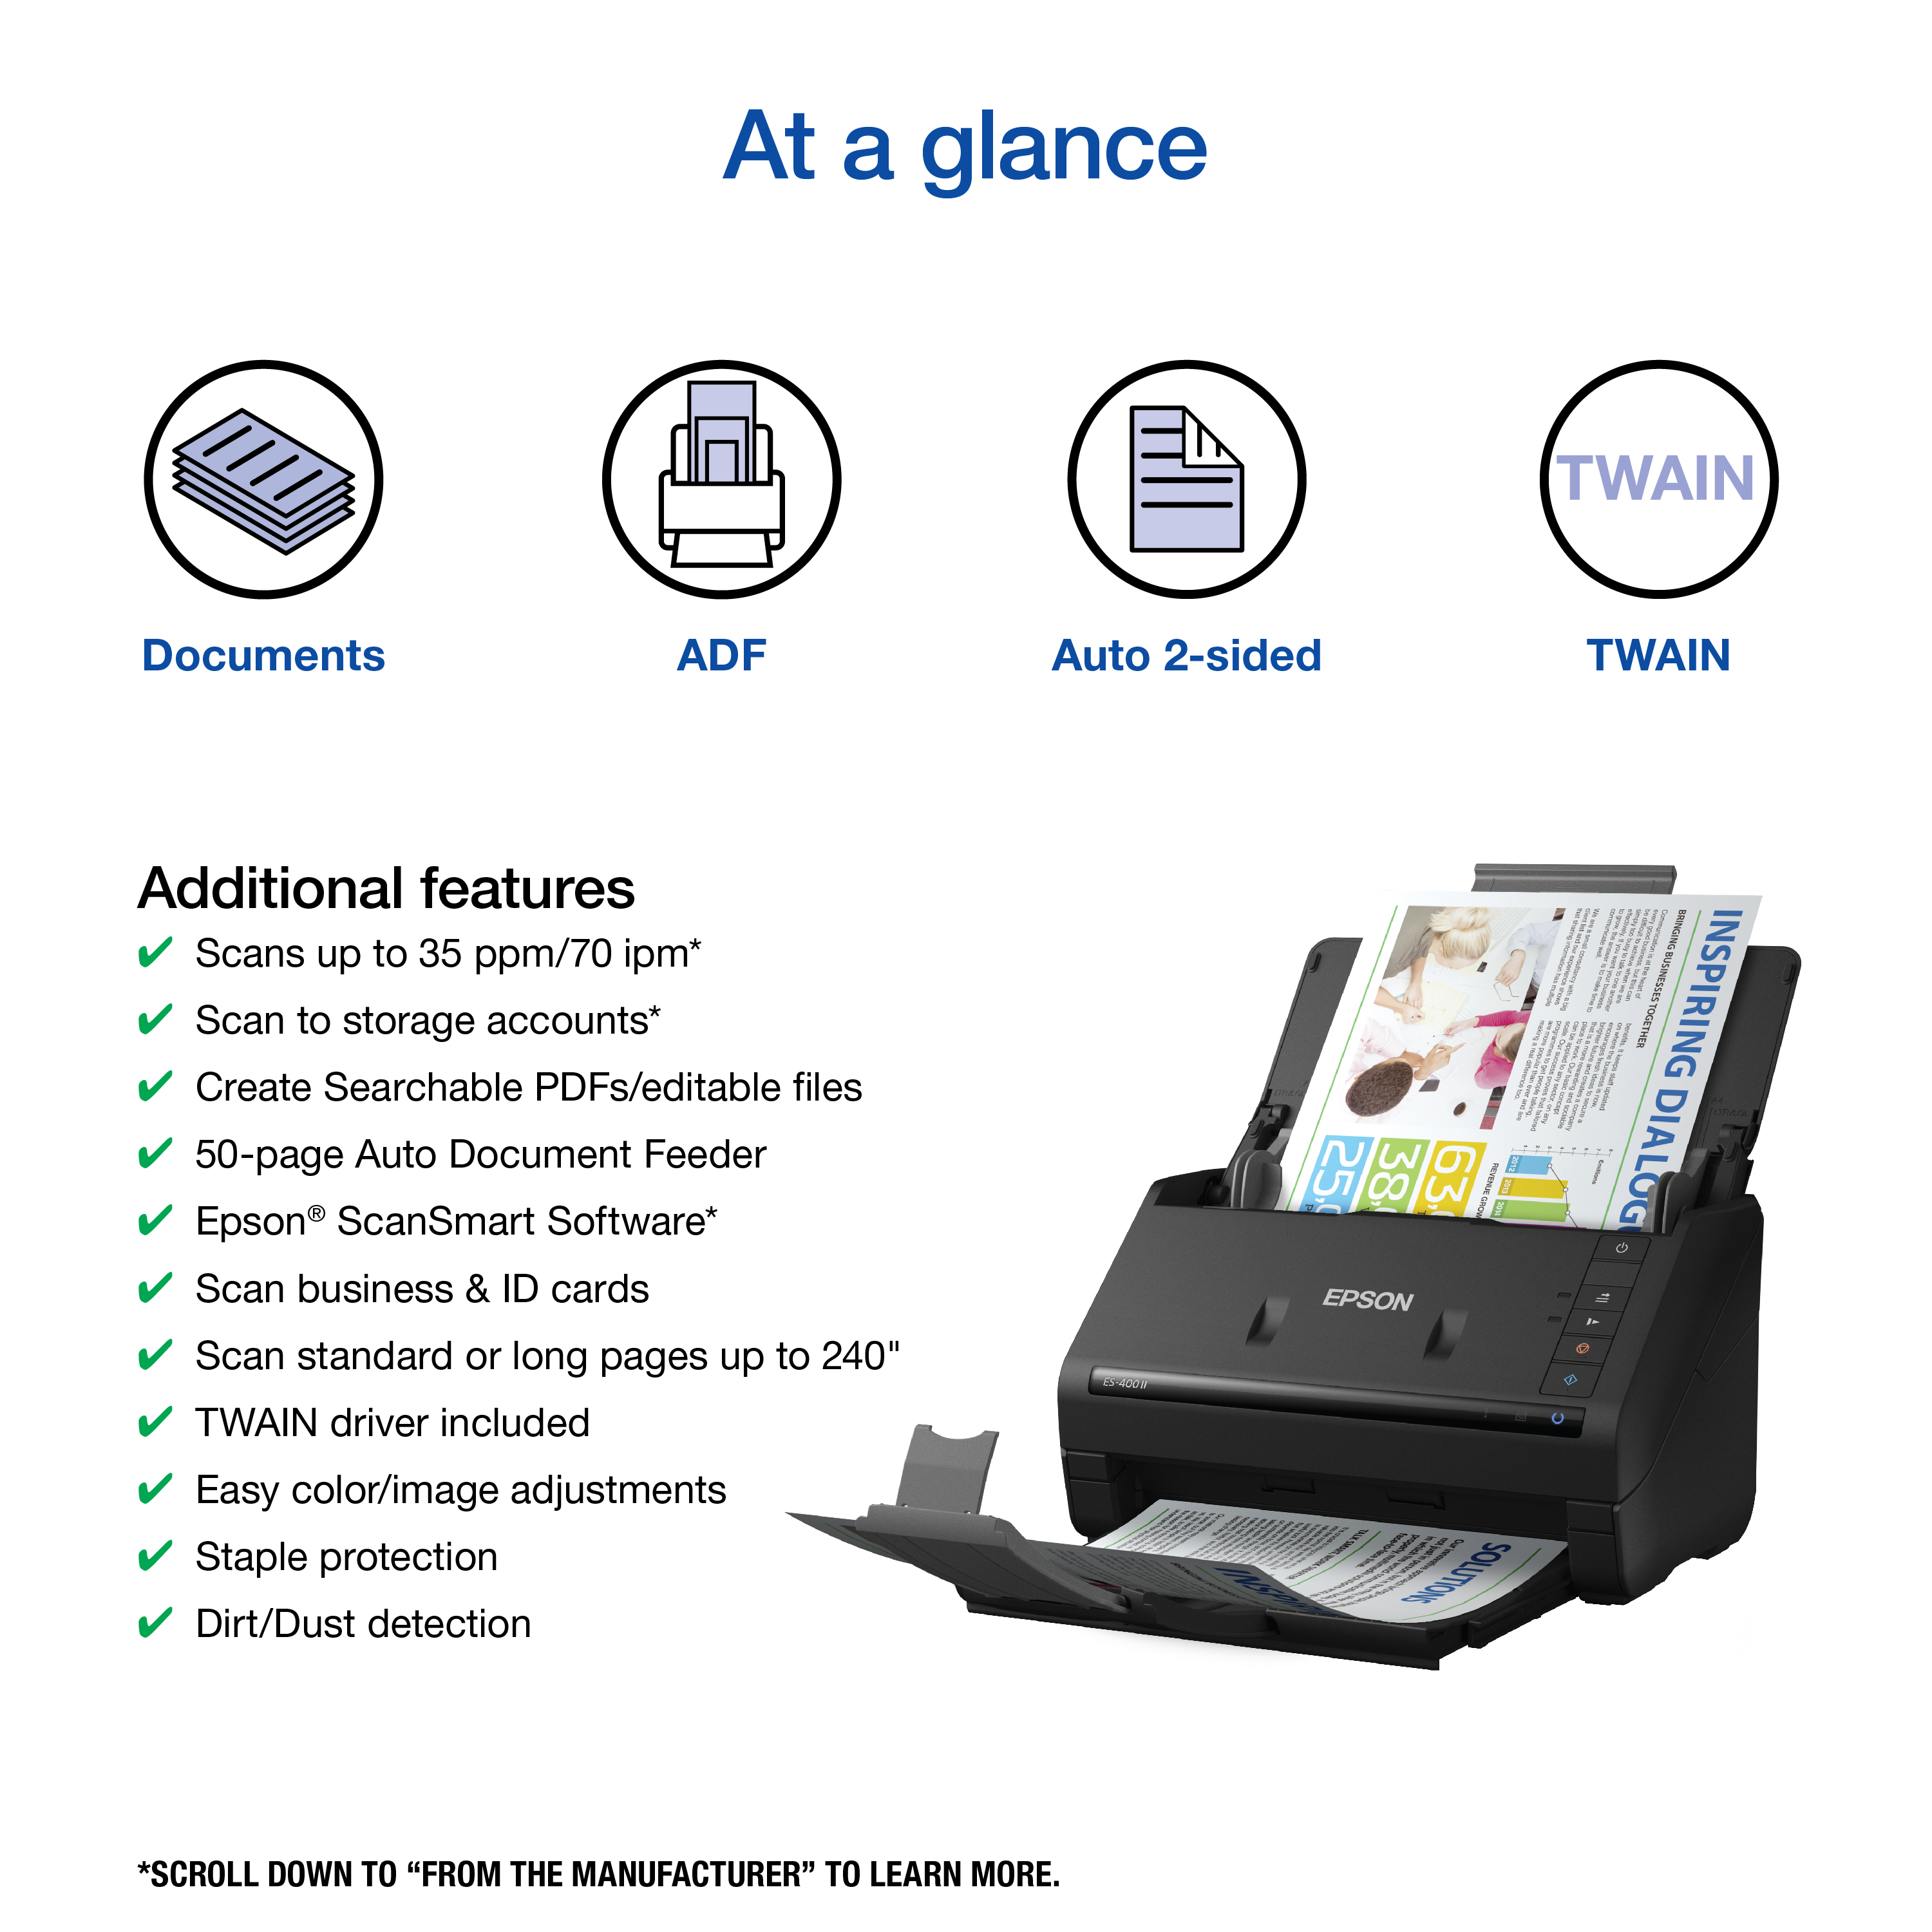 Epson WorkForce ES-400 II Color Duplex Desktop Document Scanner for PC and Mac, with Auto Document Feeder (ADF) and Image Adjustment Tools - image 3 of 8